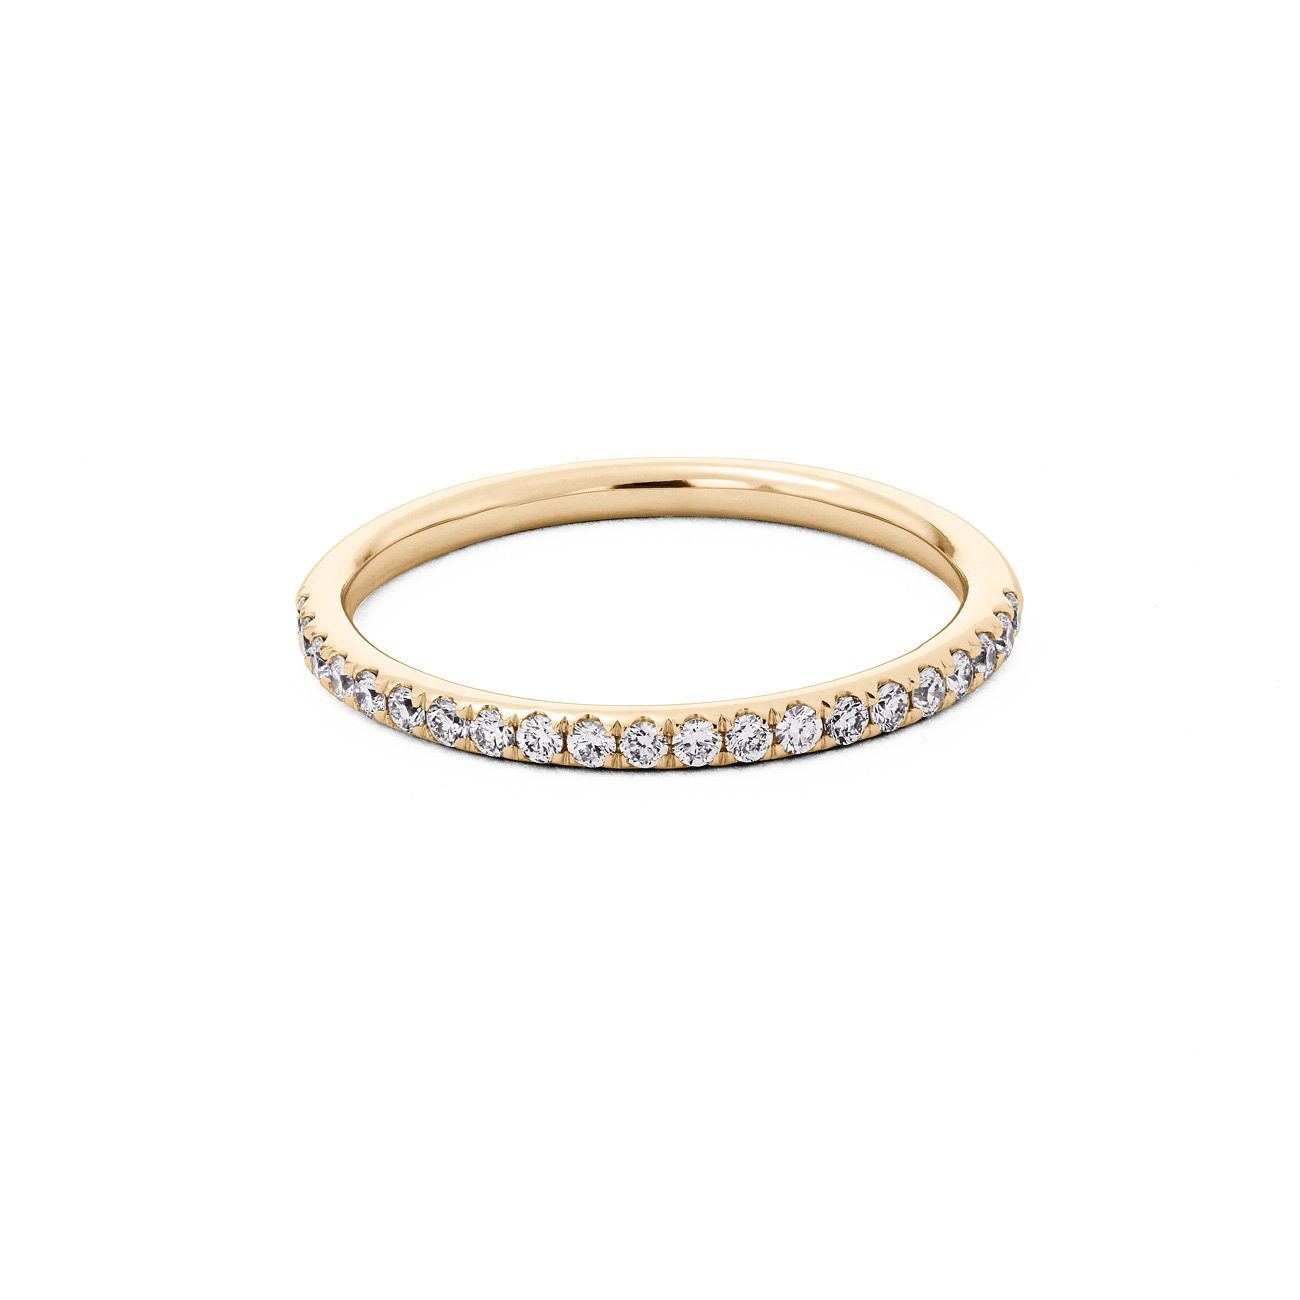 14k Yellow Gold 4 Row Design Pave Set Wide Natural Diamond Band Ring Size 5  Gift | eBay